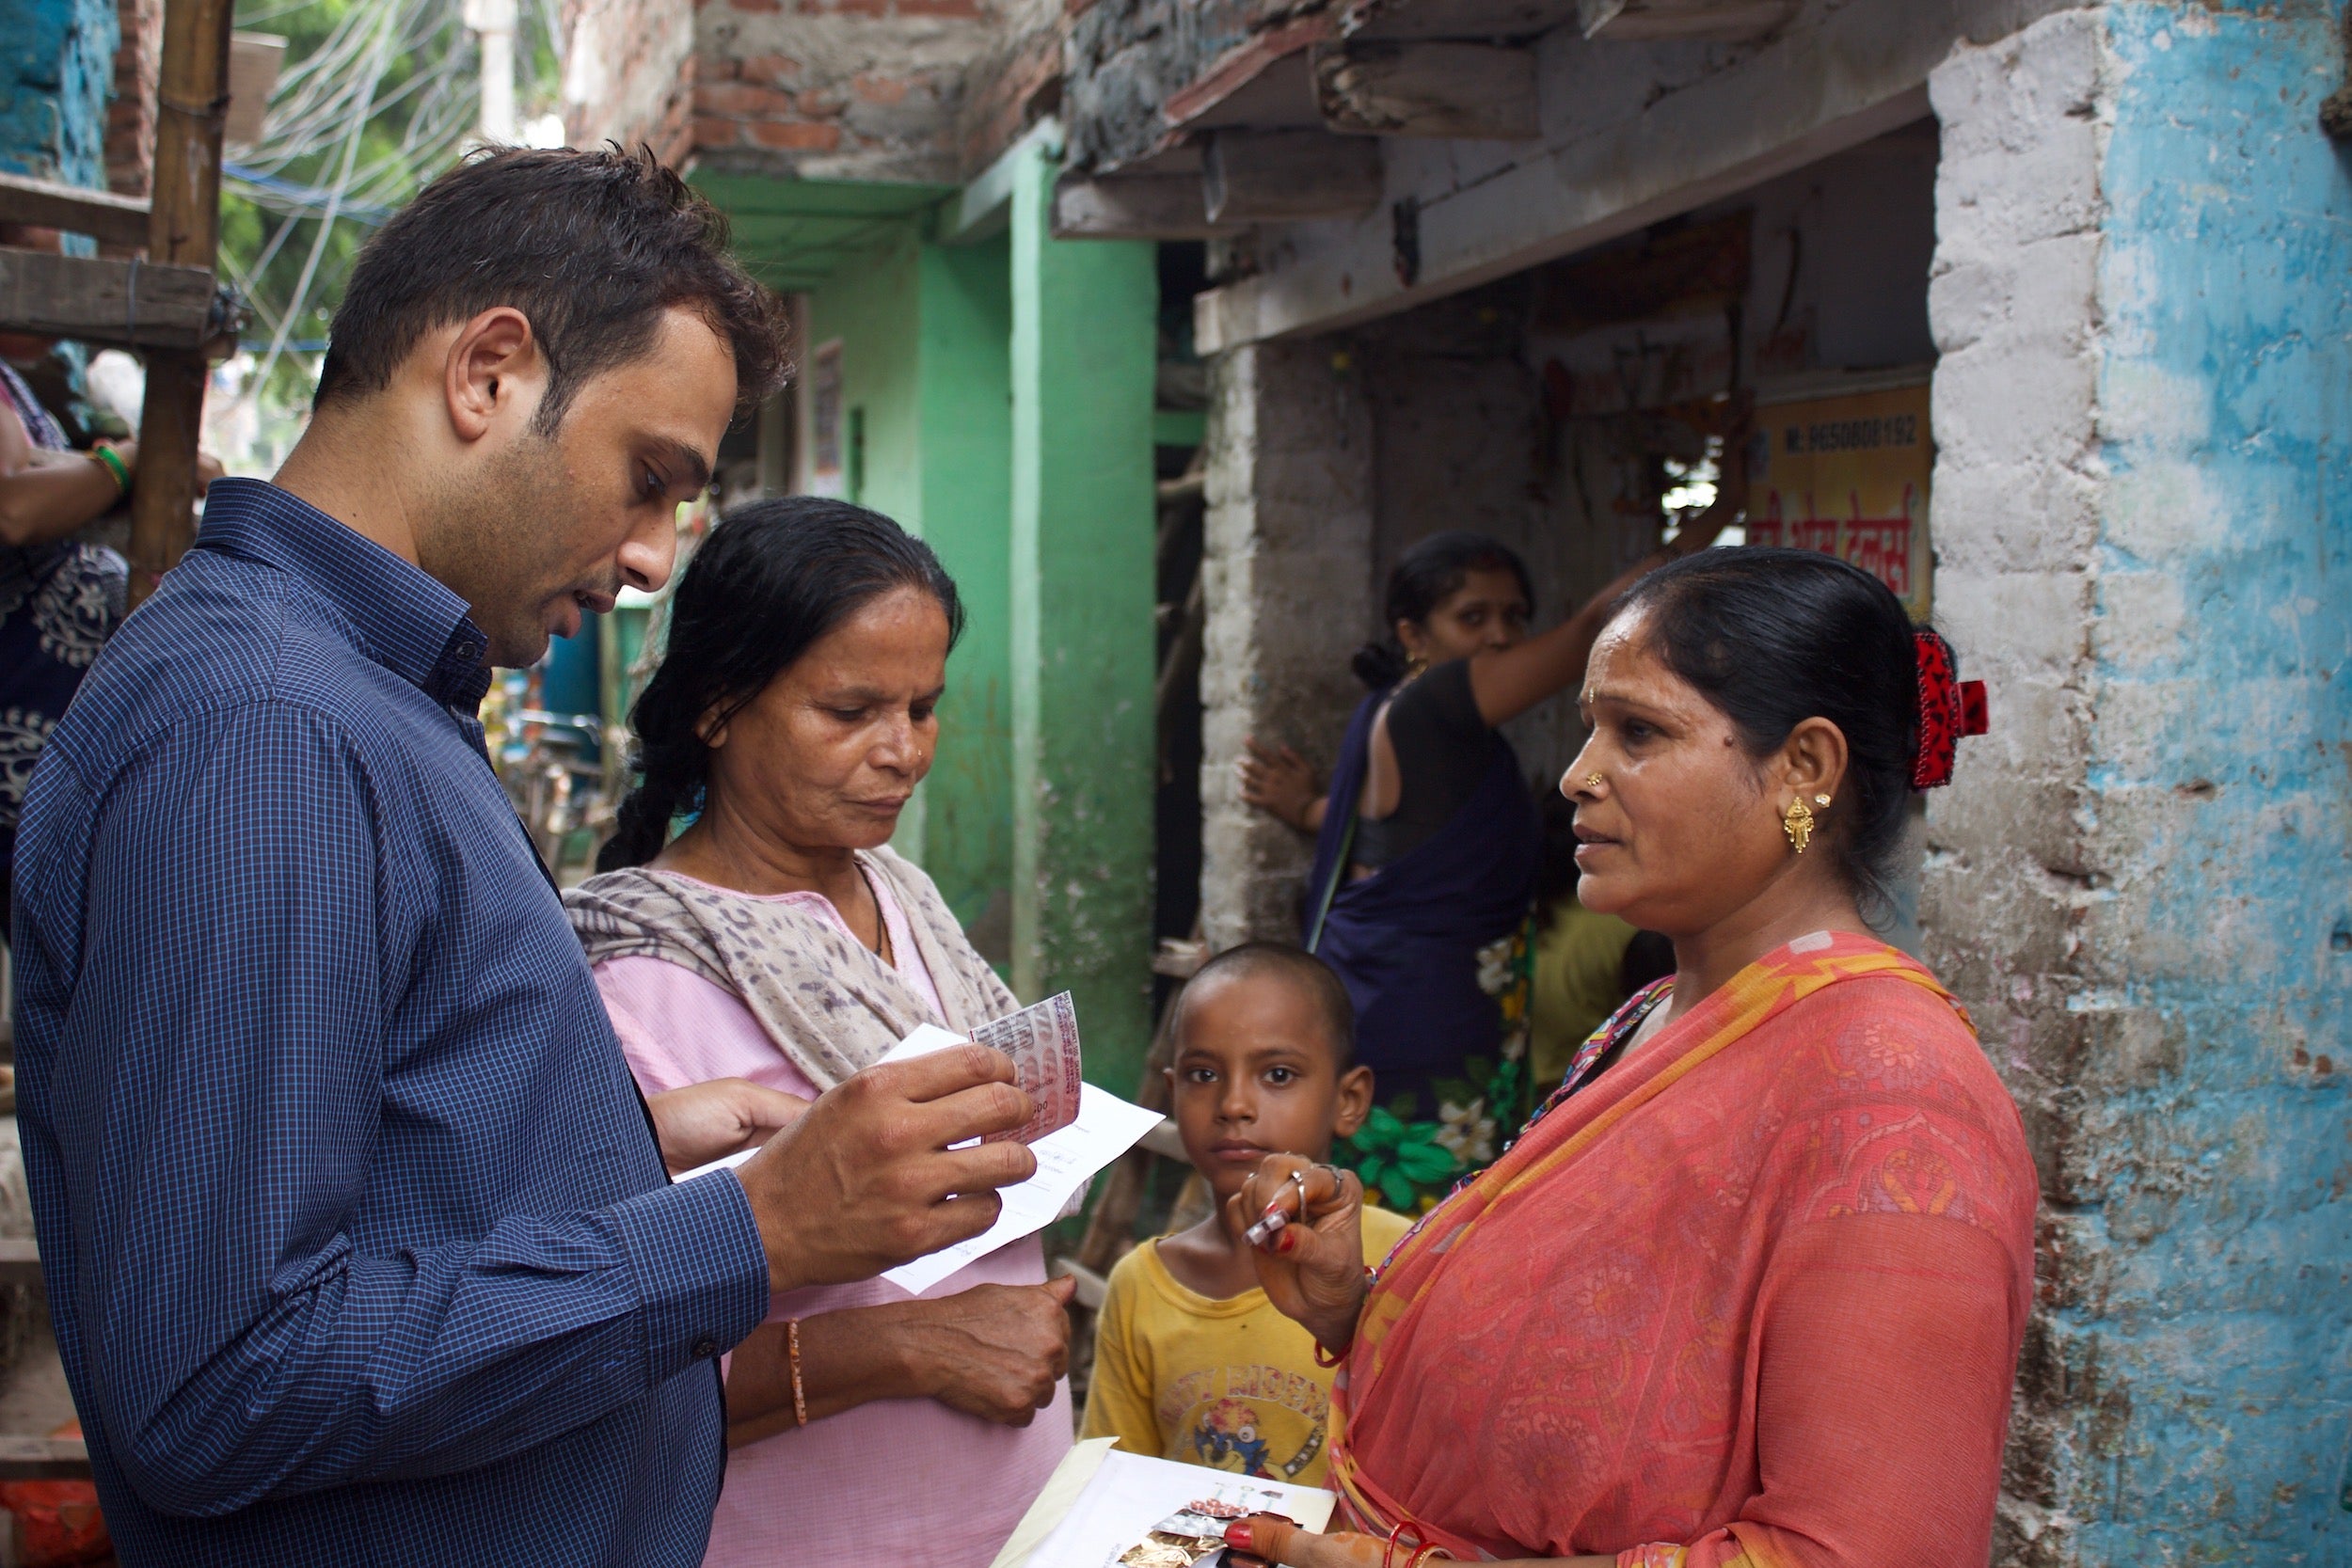 A member of the Smile Foundation team gives advice to Asha, a beneficiary, on how to take her medicine